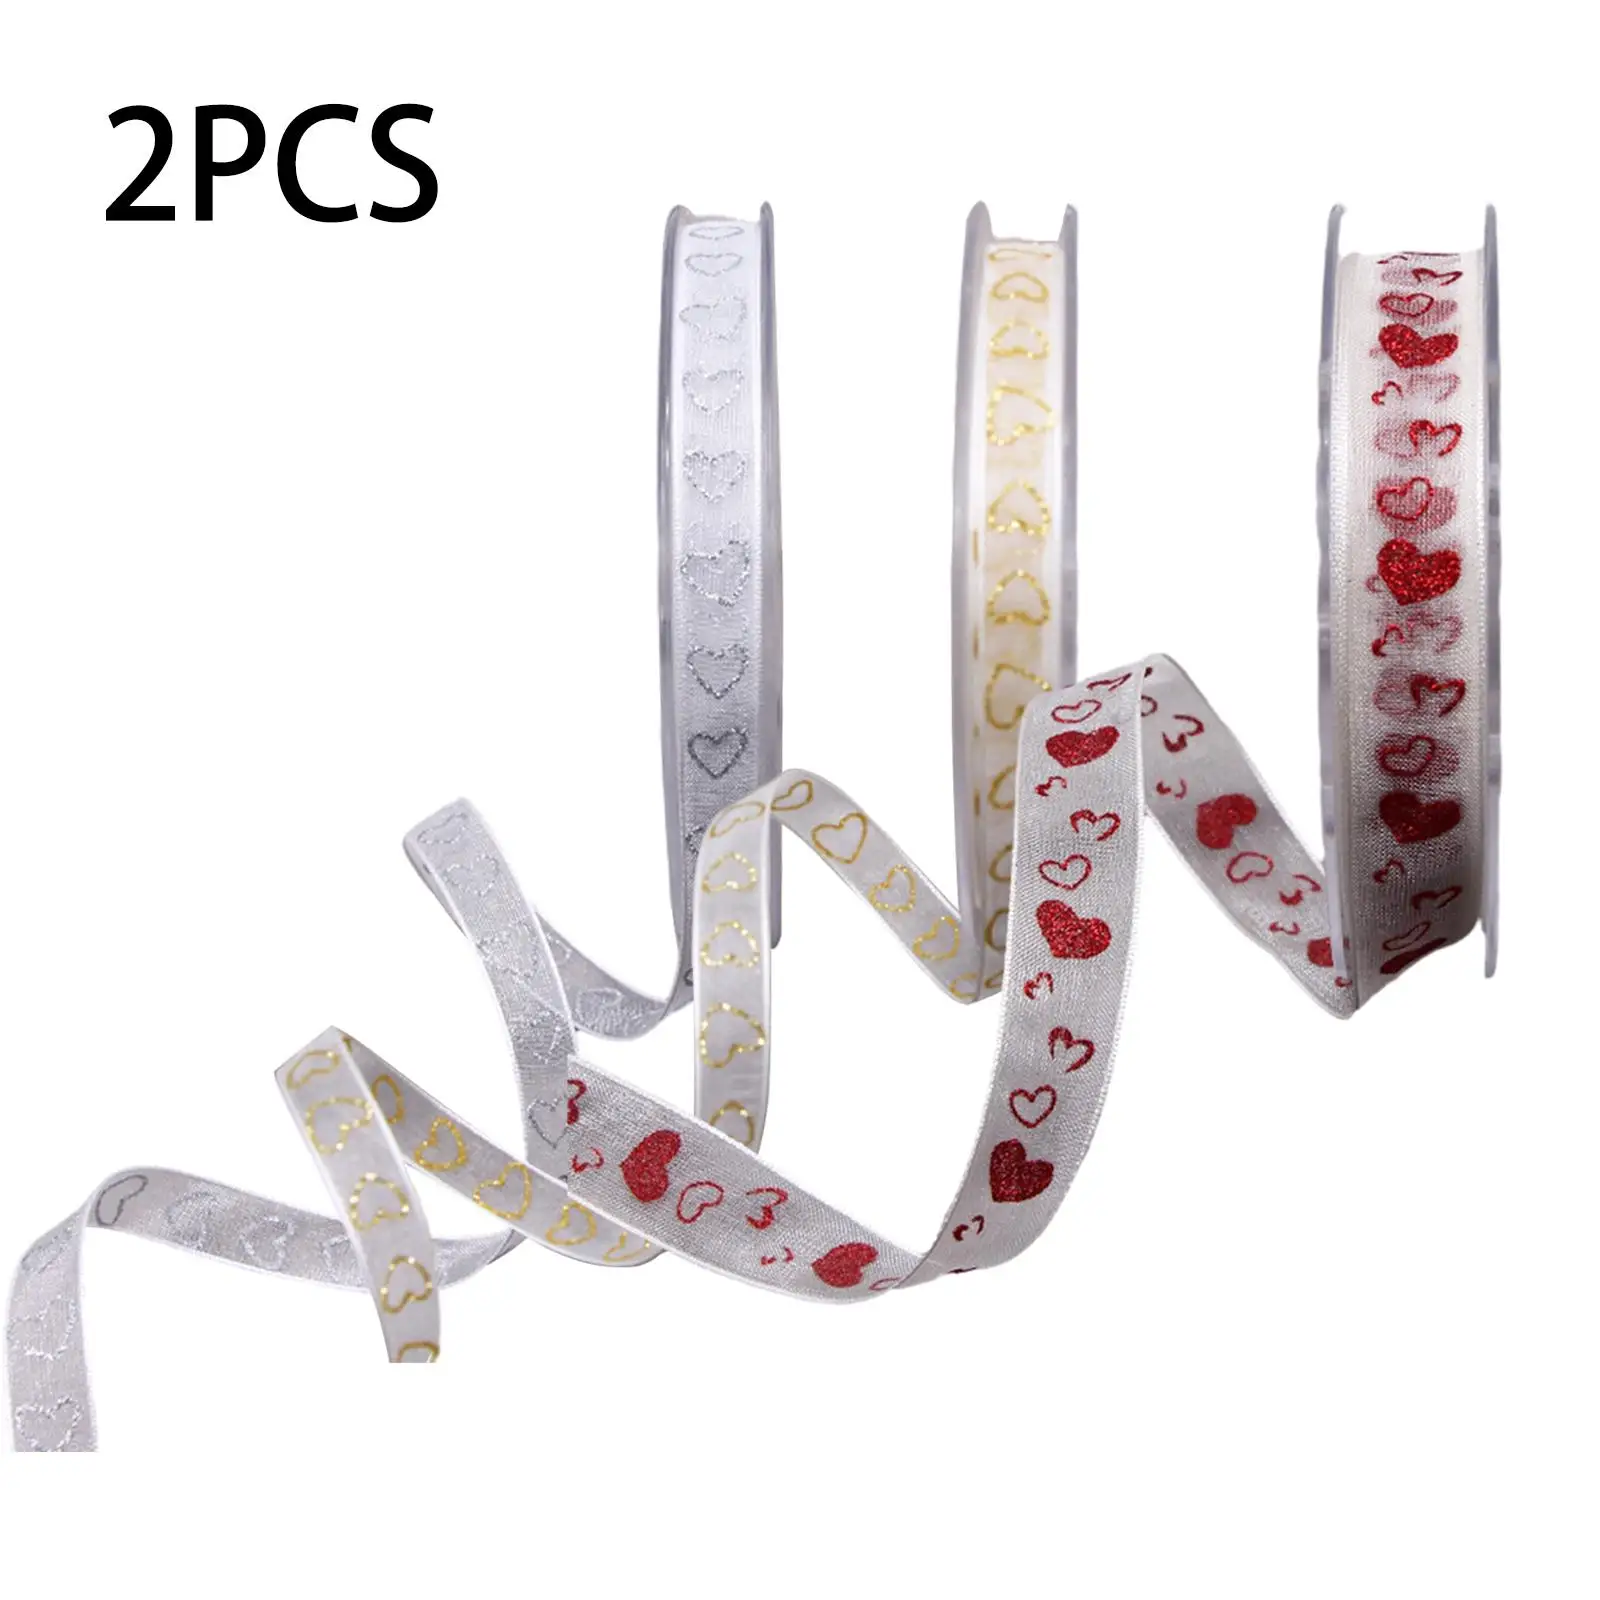 2 Roll Valentine`s Day Ribbons Gift Packaging Love Pattern Wrapping Ribbons for Anniversary Wedding Gift Baskets Party Birthday